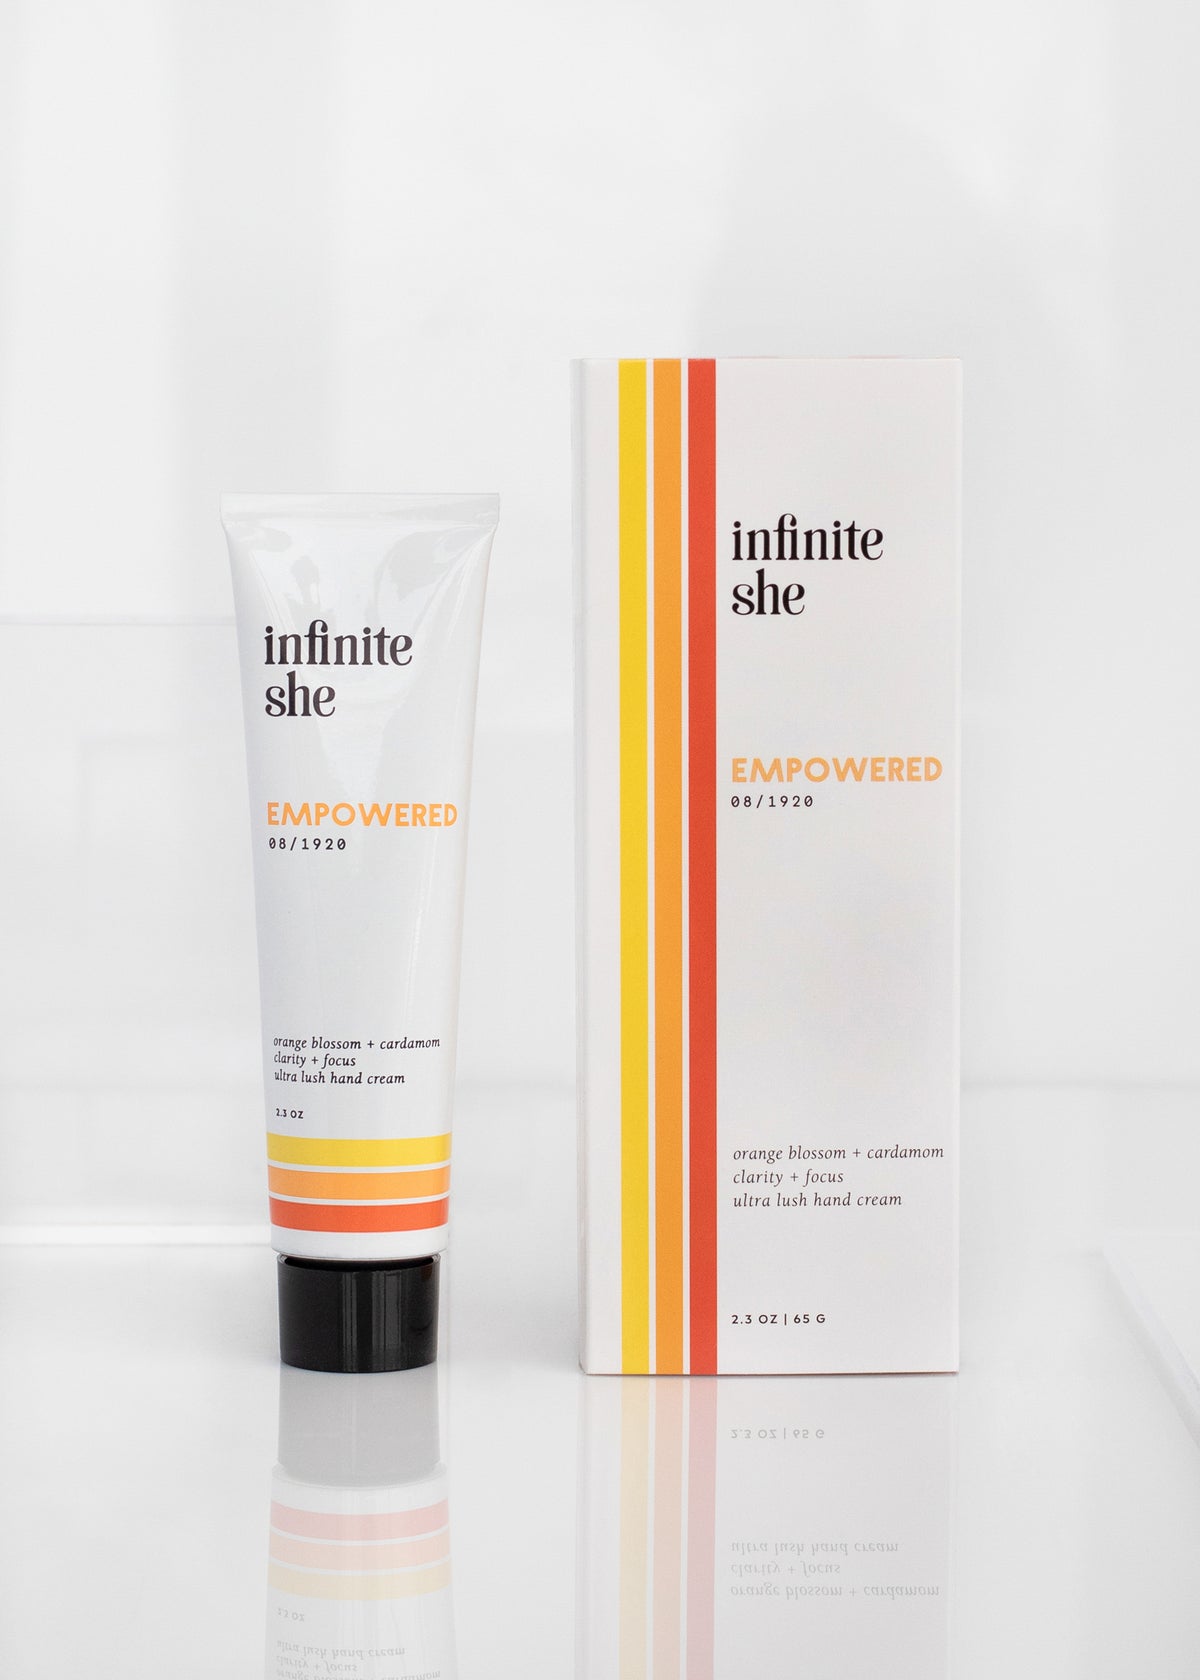 A tube of Margot Elena's Infinite She Empowered Ultra Lush Hand Cream next to its packaging. The items are labeled "empowered" and display an orange, yellow, and white color theme on a white background.